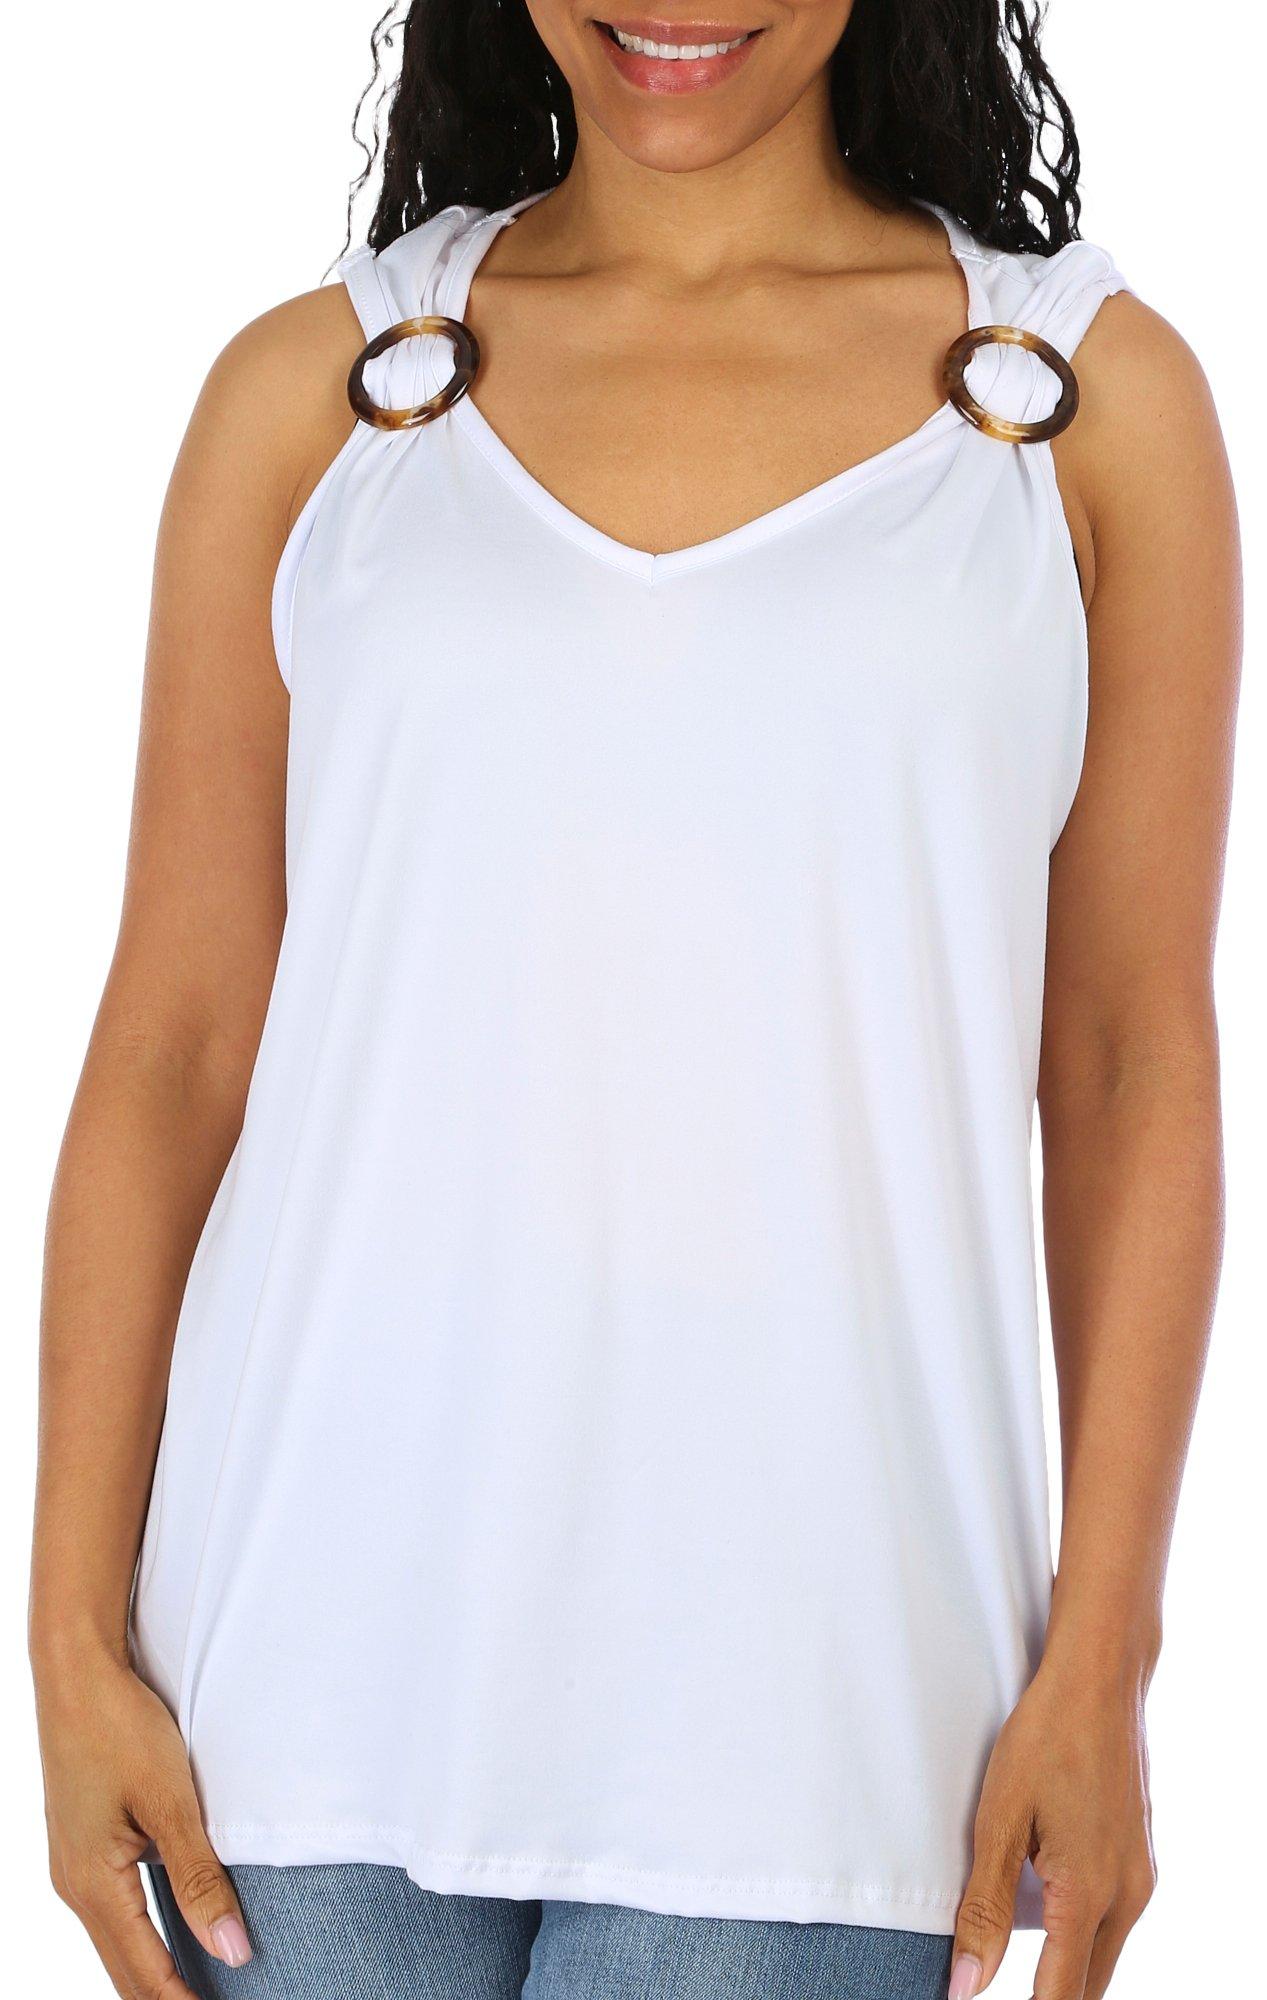 Womens Solid Sleeveless Ring Top